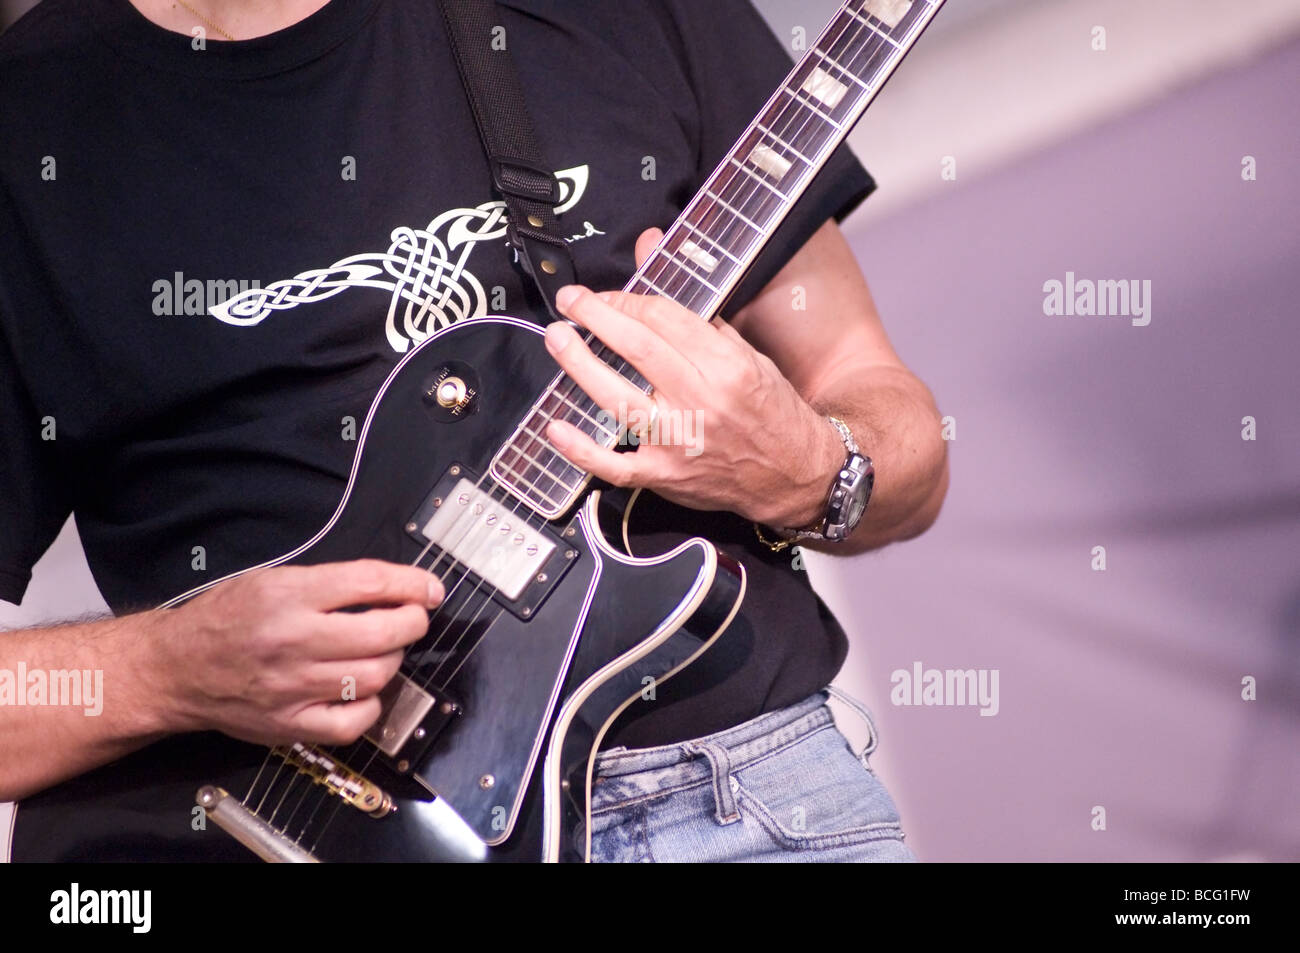 electric guitar player Stock Photo